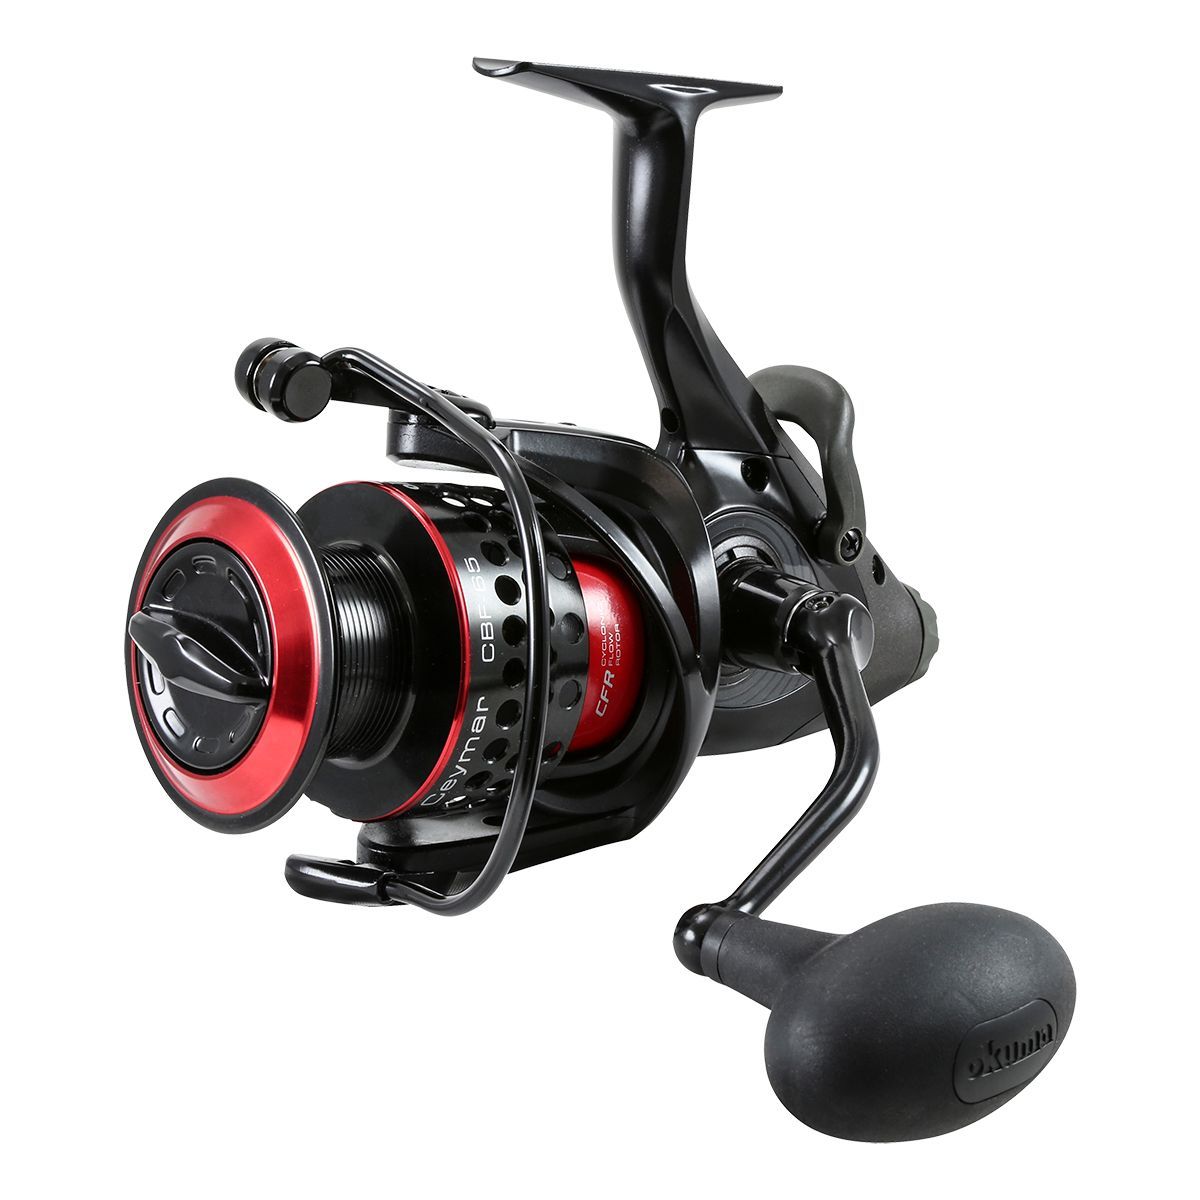 Okuma Right Saltwater Fishing Reels with Low Profile for sale